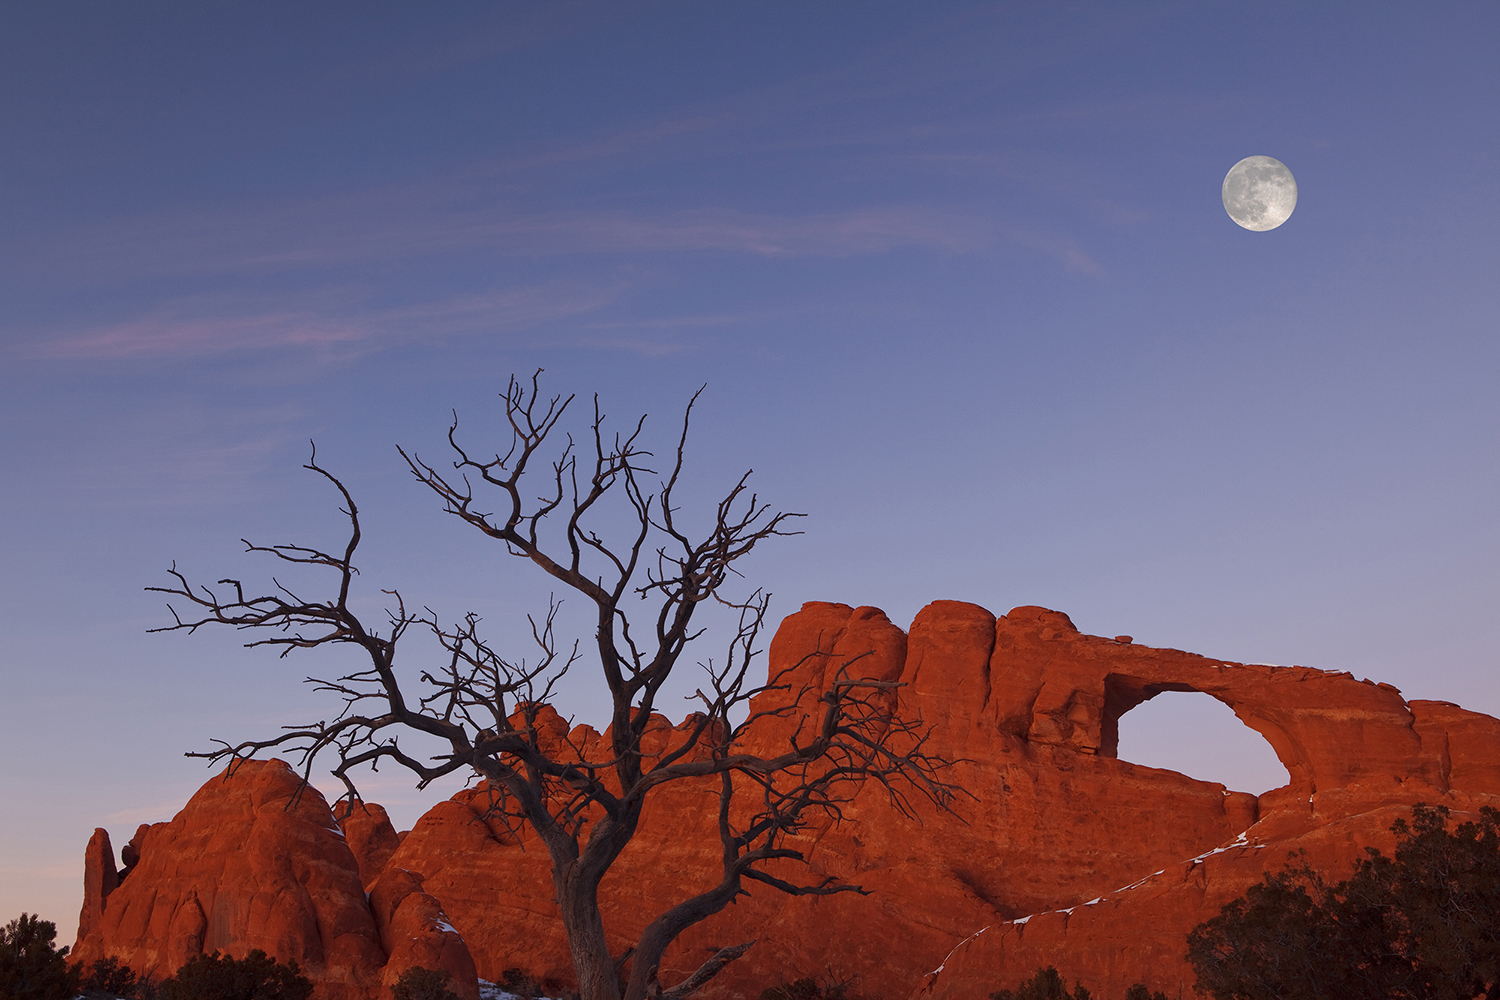 Skyline Arch and Full Moon, Arches National Park, Moab, Utah, USA